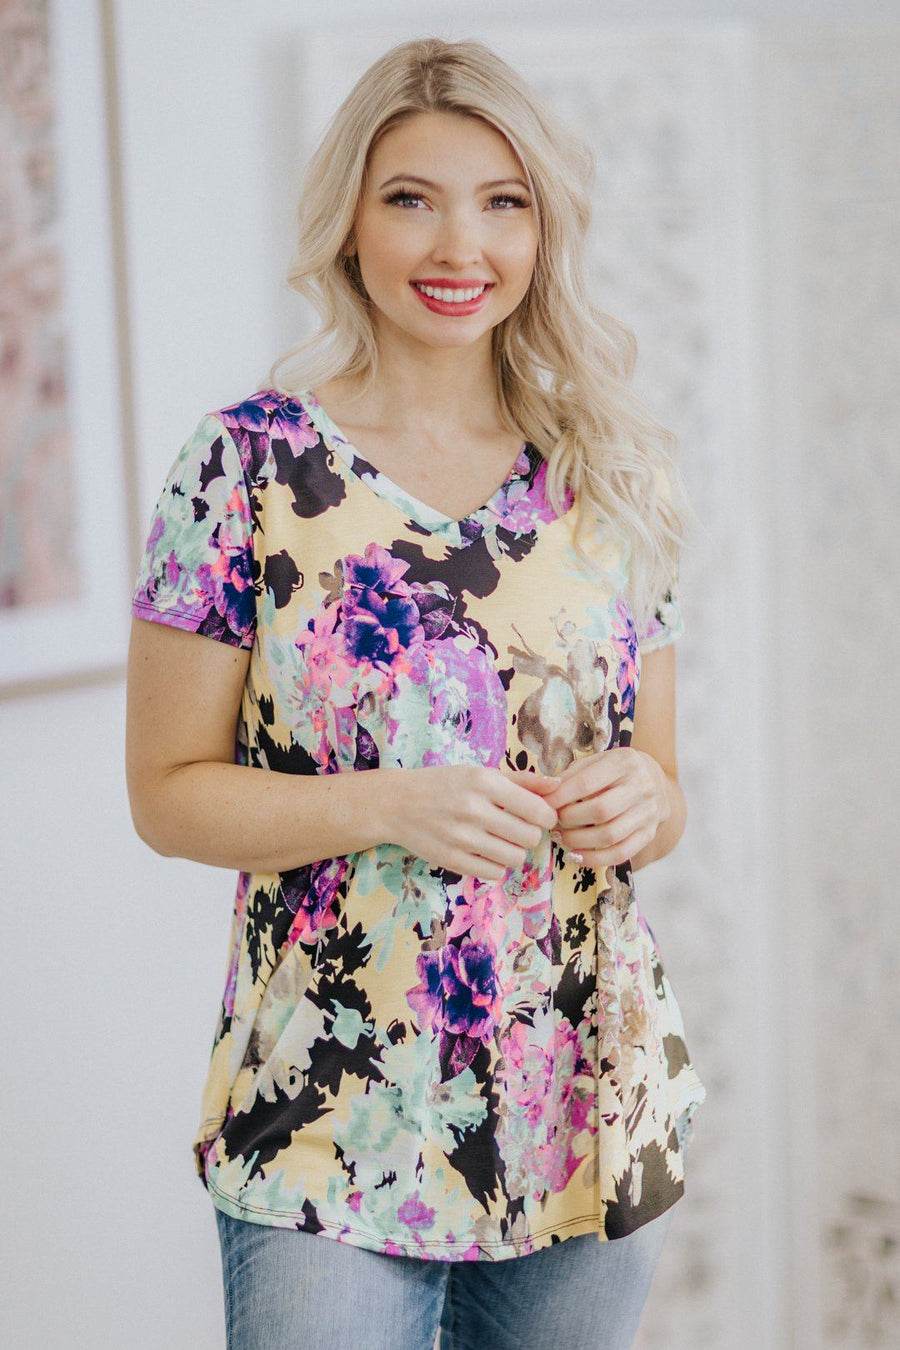 Shop our Floral Tops in several sizes and colors - Filly Flair